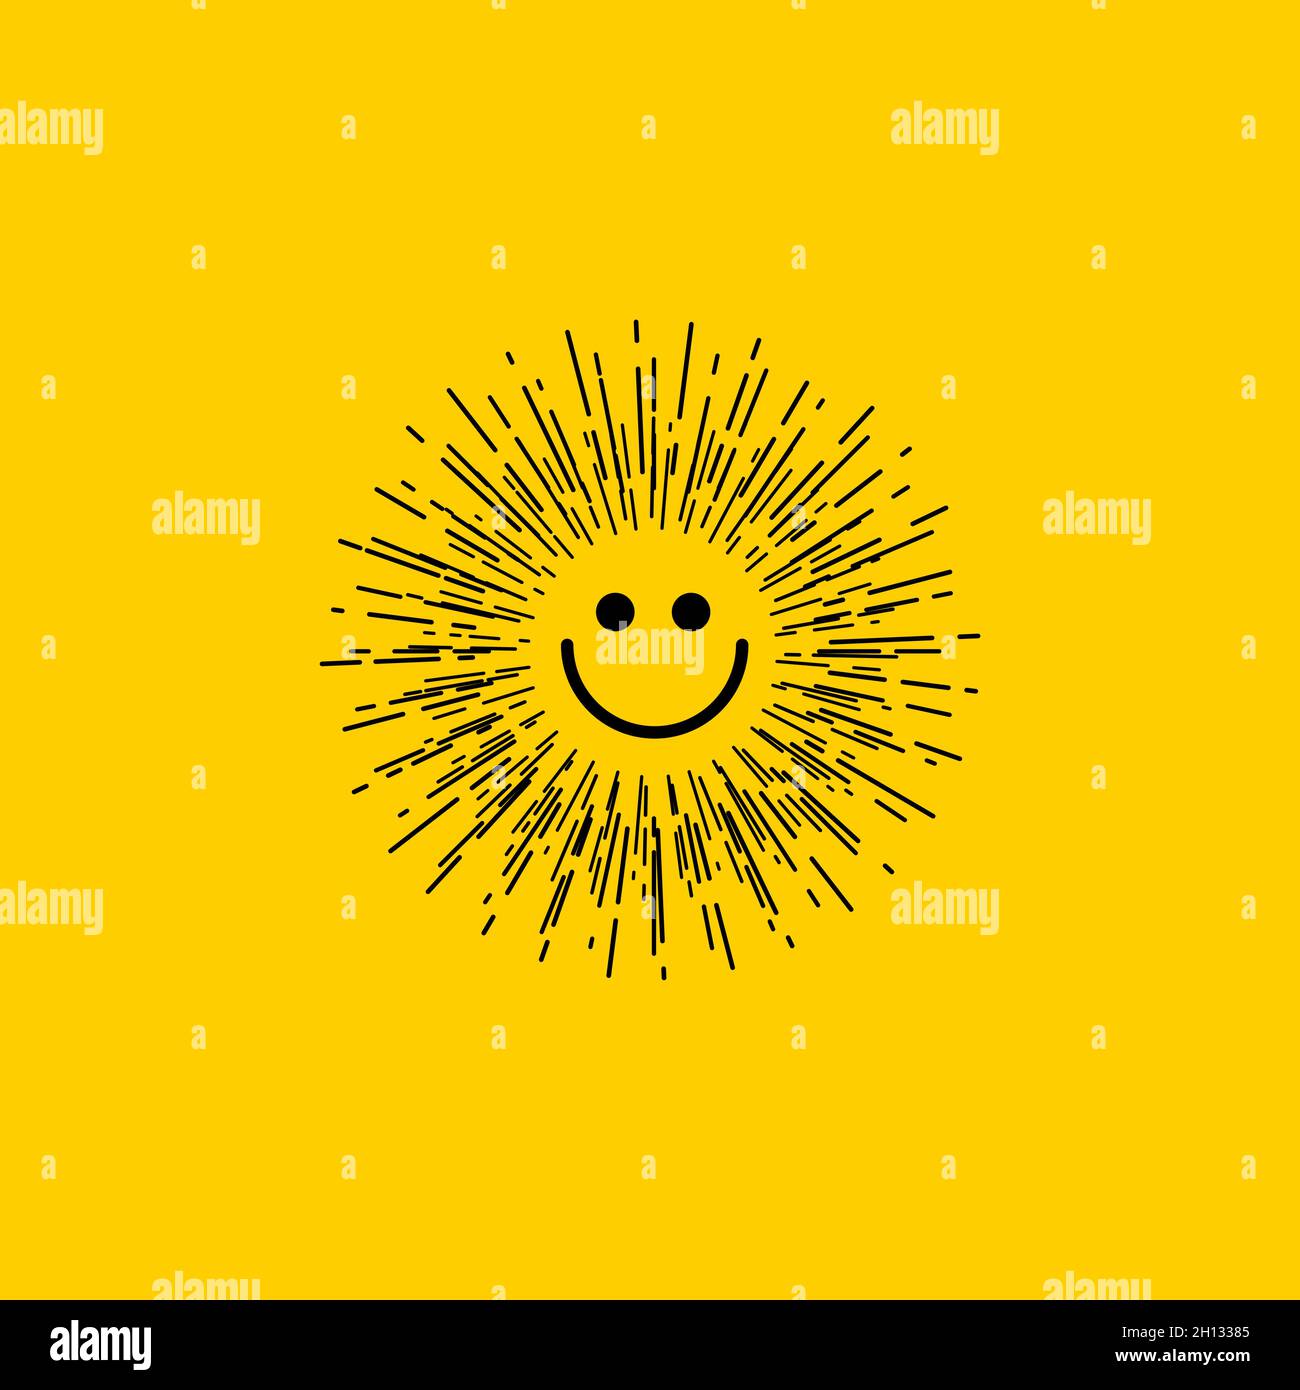 Happy abstract yellow smile smiley Banque d'images vectorielles - Page 3 -  Alamy